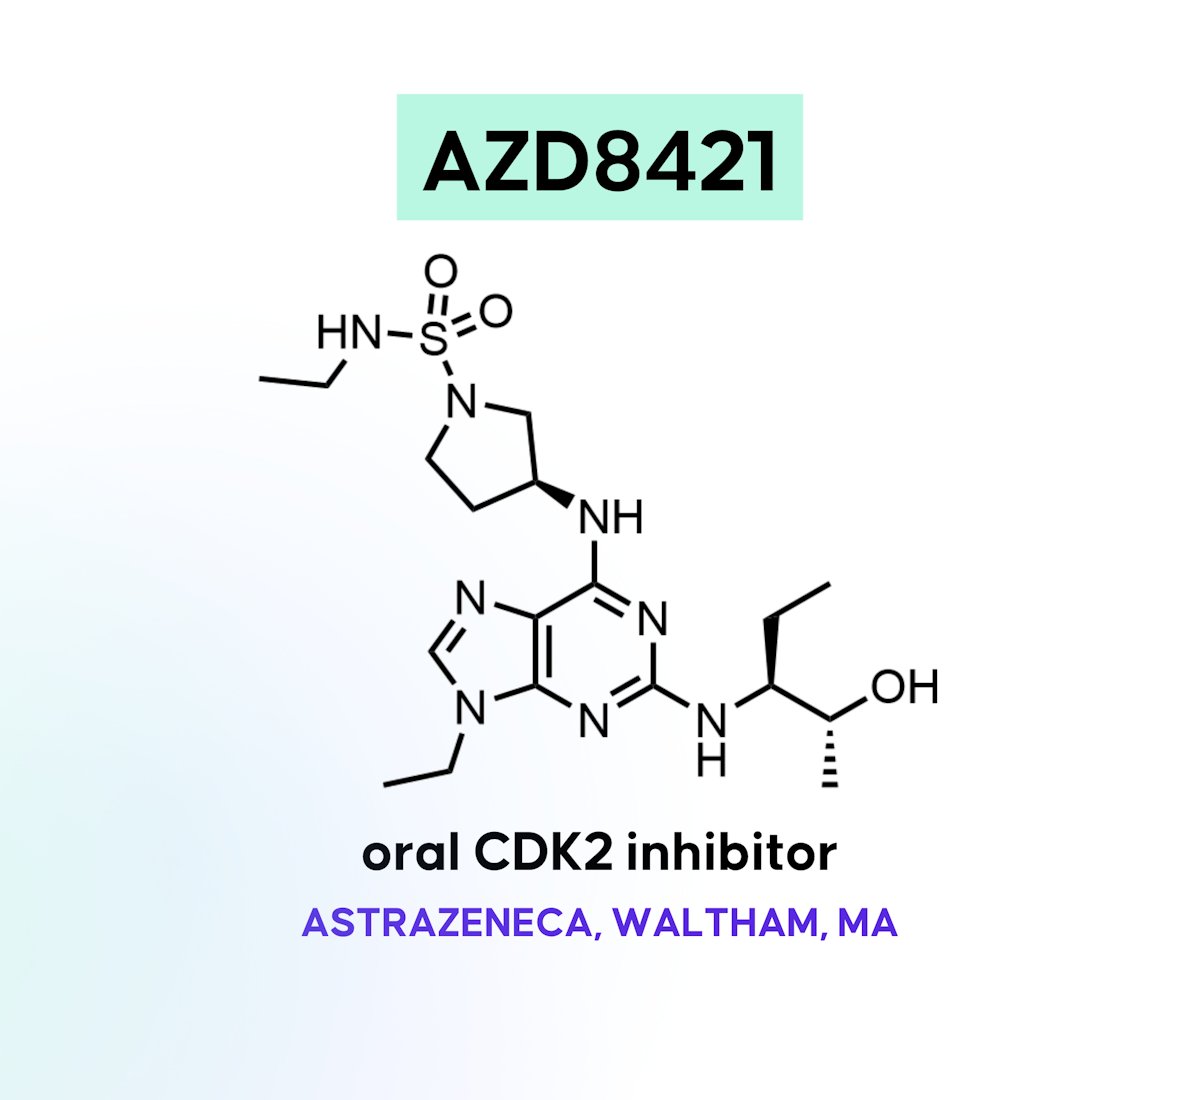 AstraZeneca’s Oral, Selective CDK2 Inhibitor for the Treatment of CDK4/6-Inhibitor Resistant Cancers and CCNE1-Amplified Tumors | drughunters.com/3V3koTB

Read our case study on AZ’s newly disclosed CDK2-selective clinical compound, AZD8421.